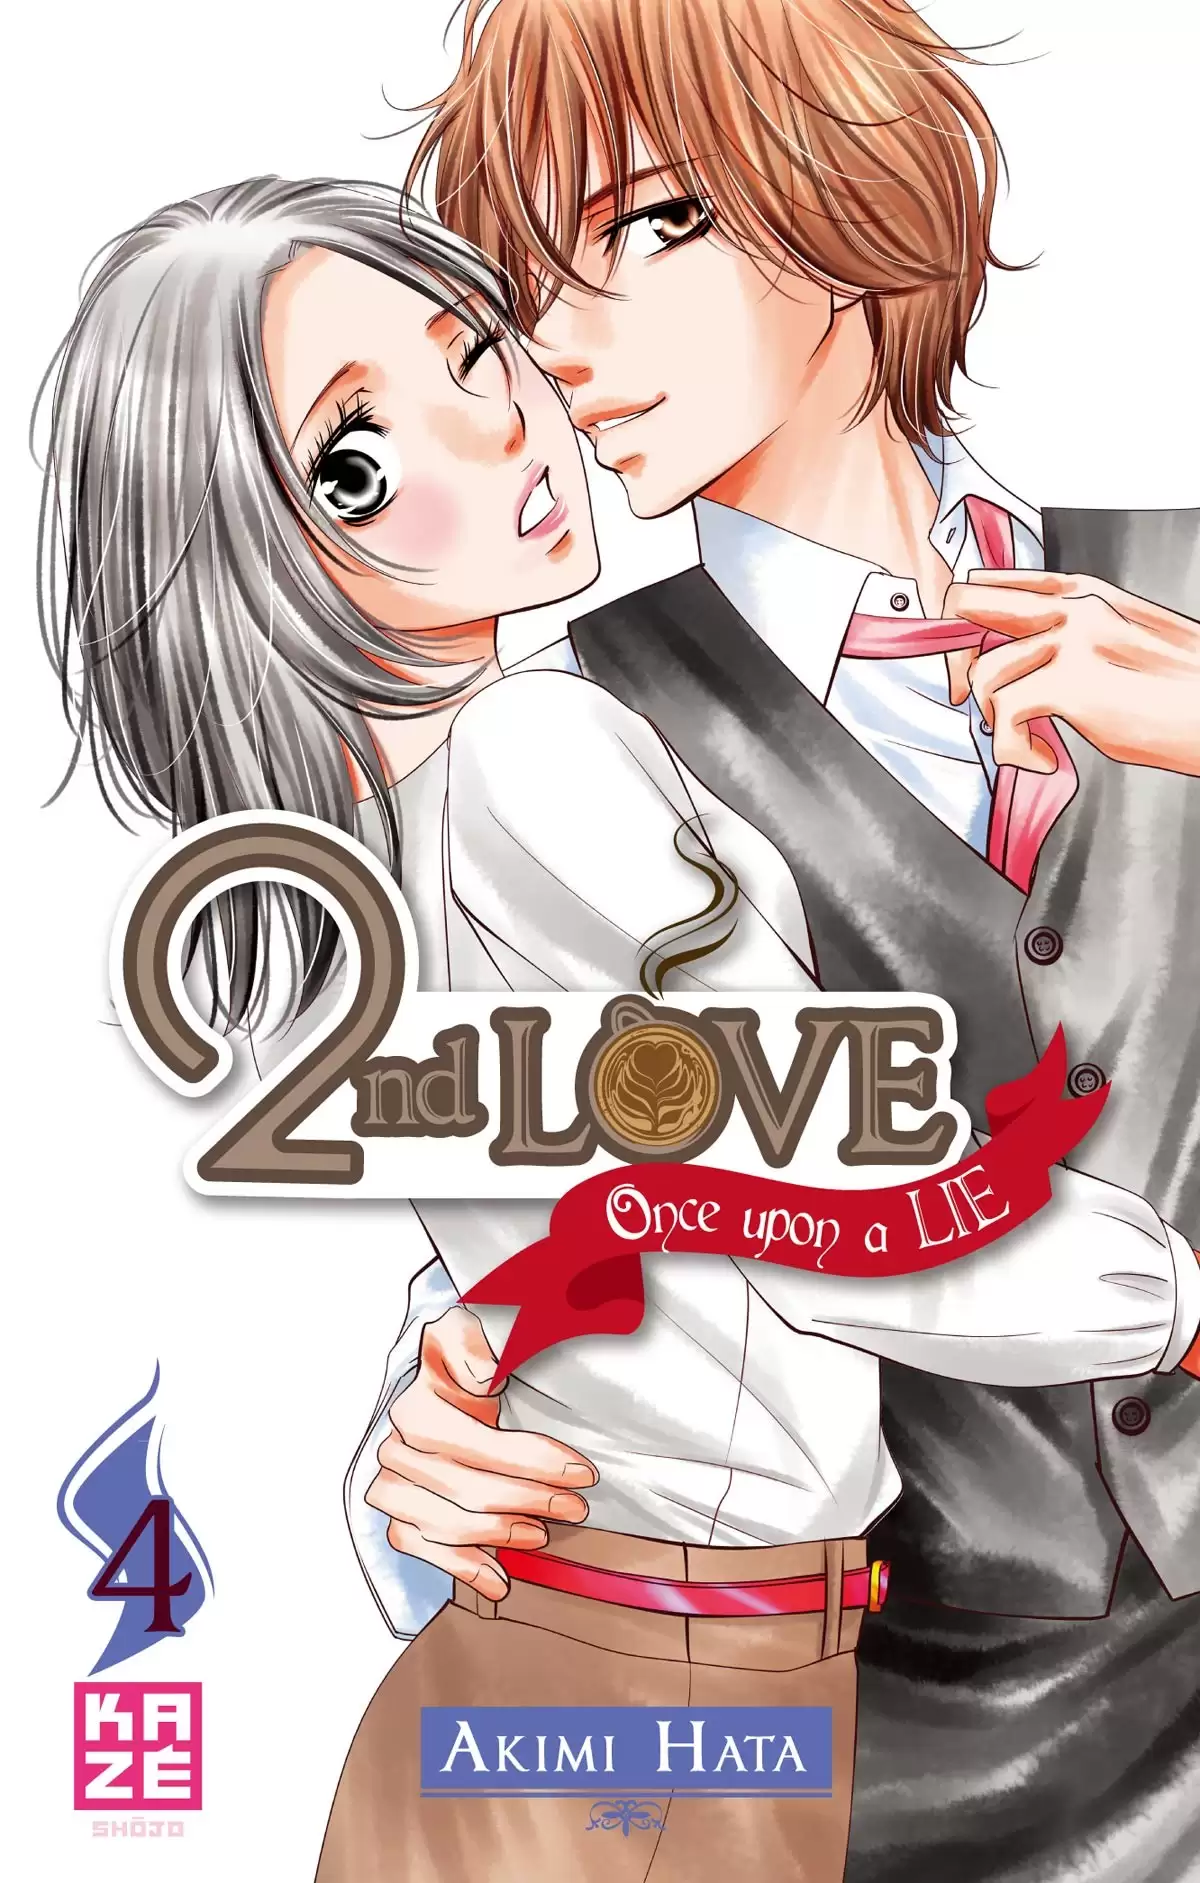 2nd love – Once upon a lie Volume 4 page 1